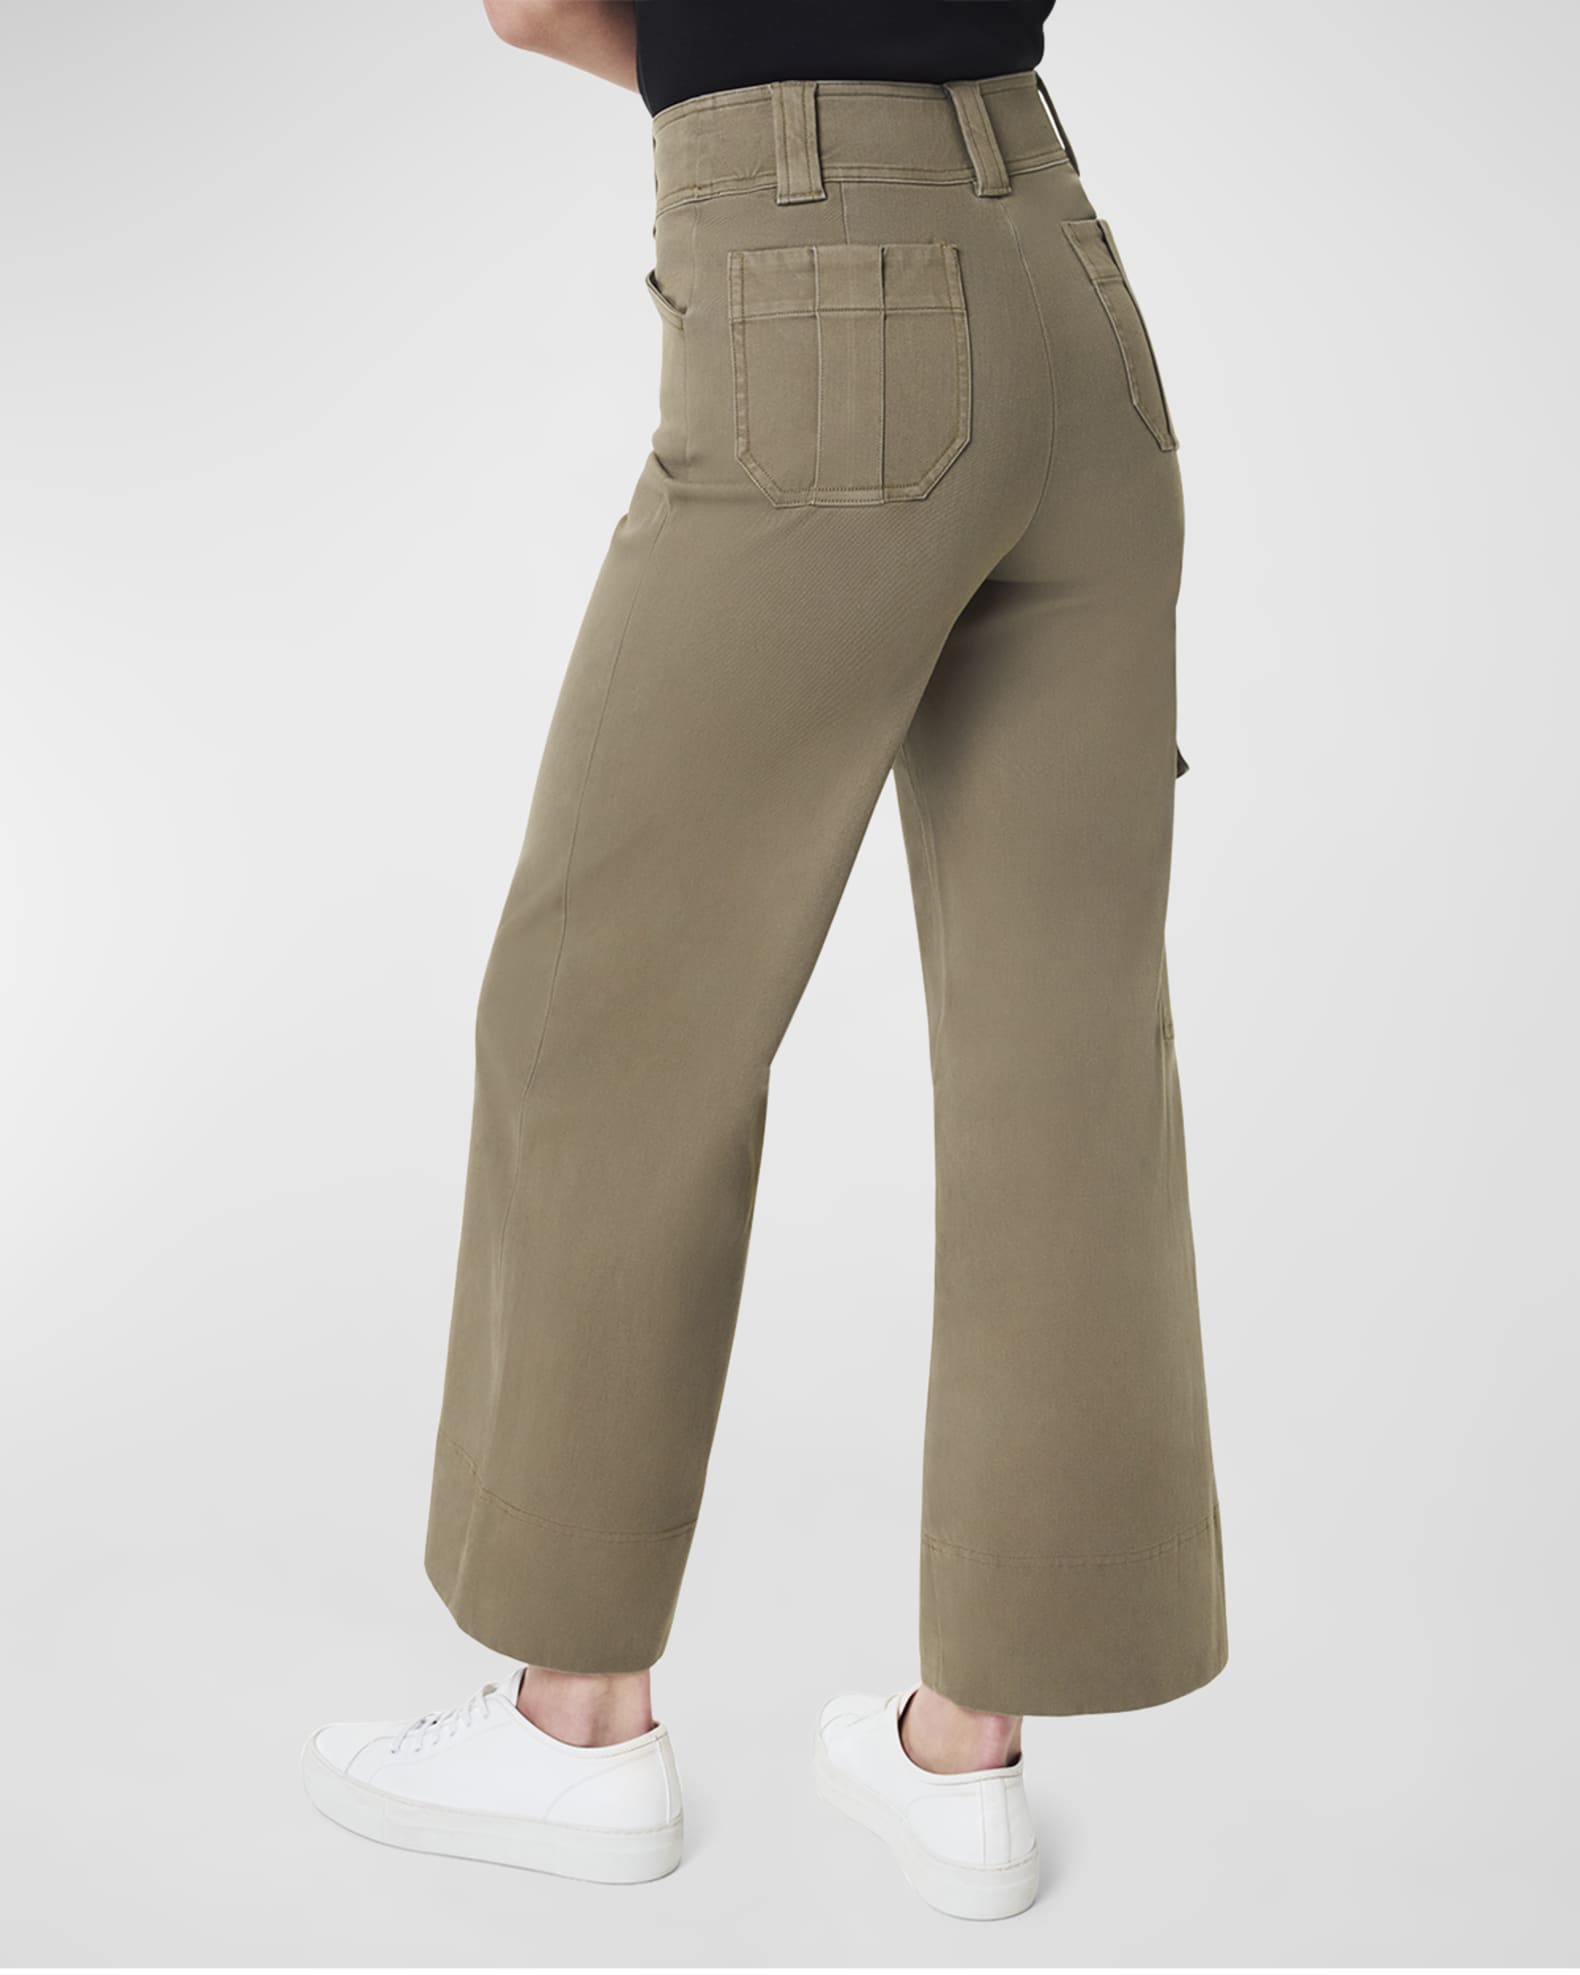 Buy SPANX Green Stretch Twill Cropped Wide Leg Trousers from Next